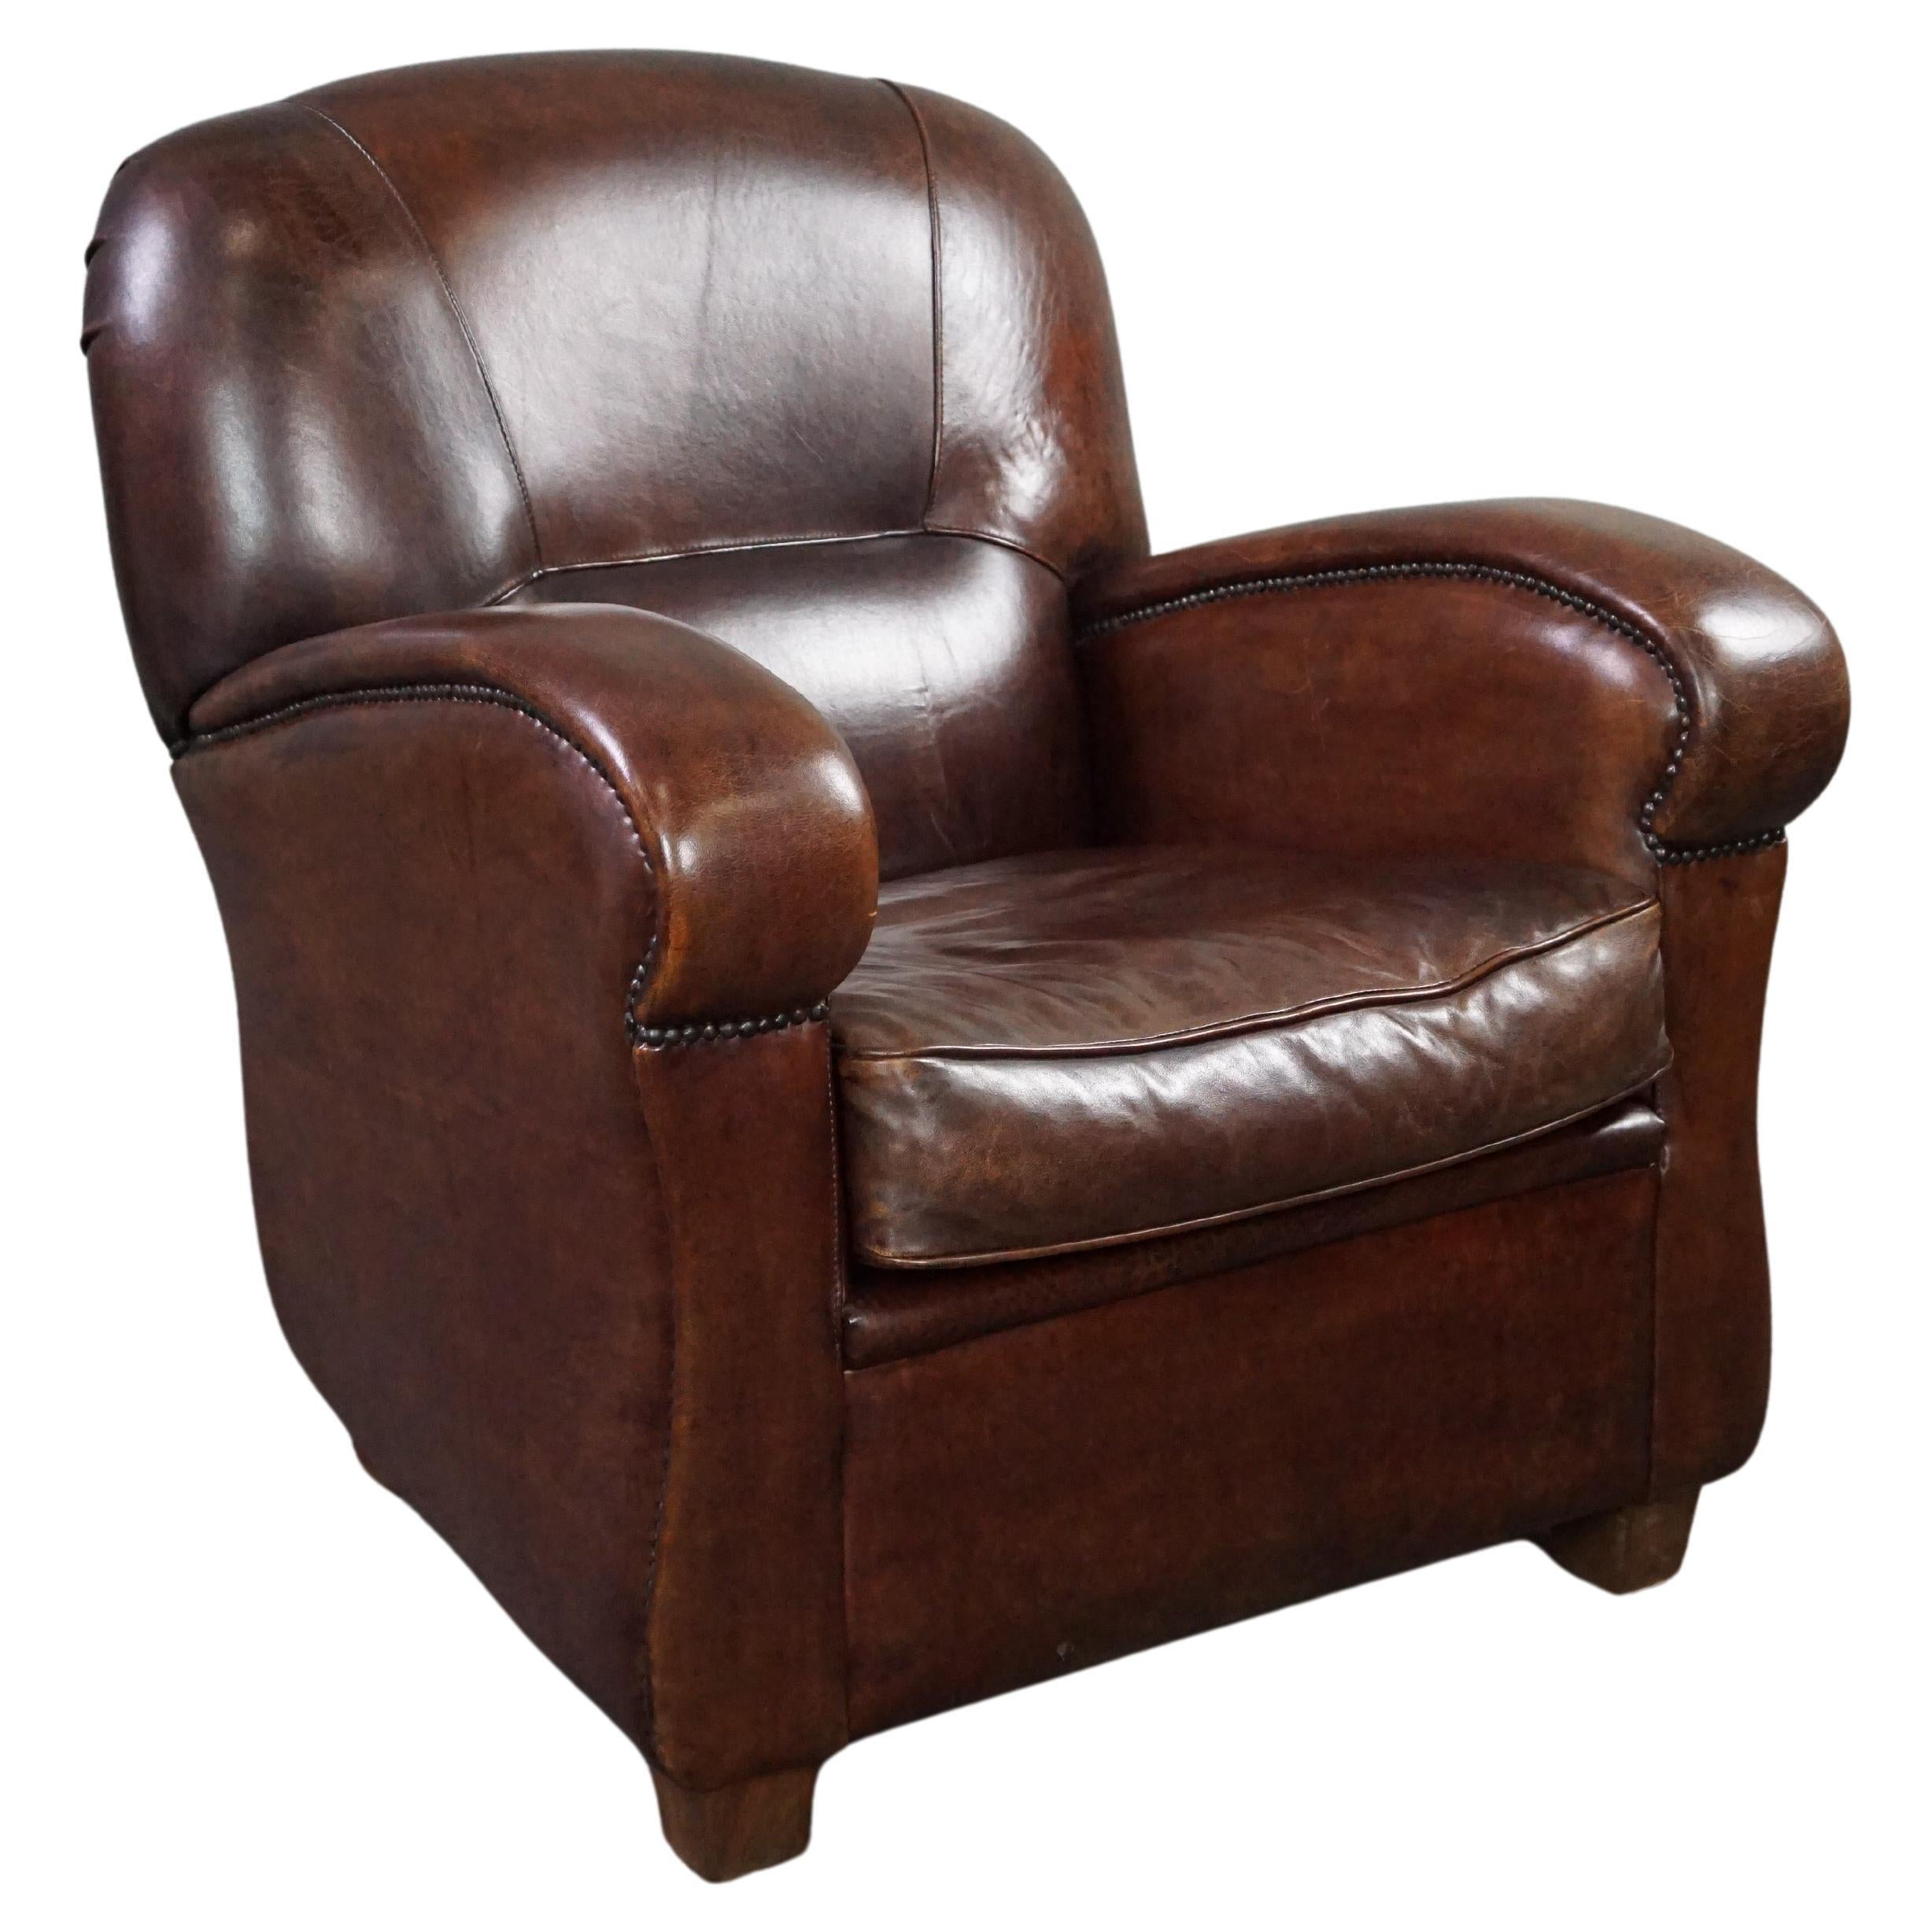 Spacious and well-fitting sheepskin armchair For Sale